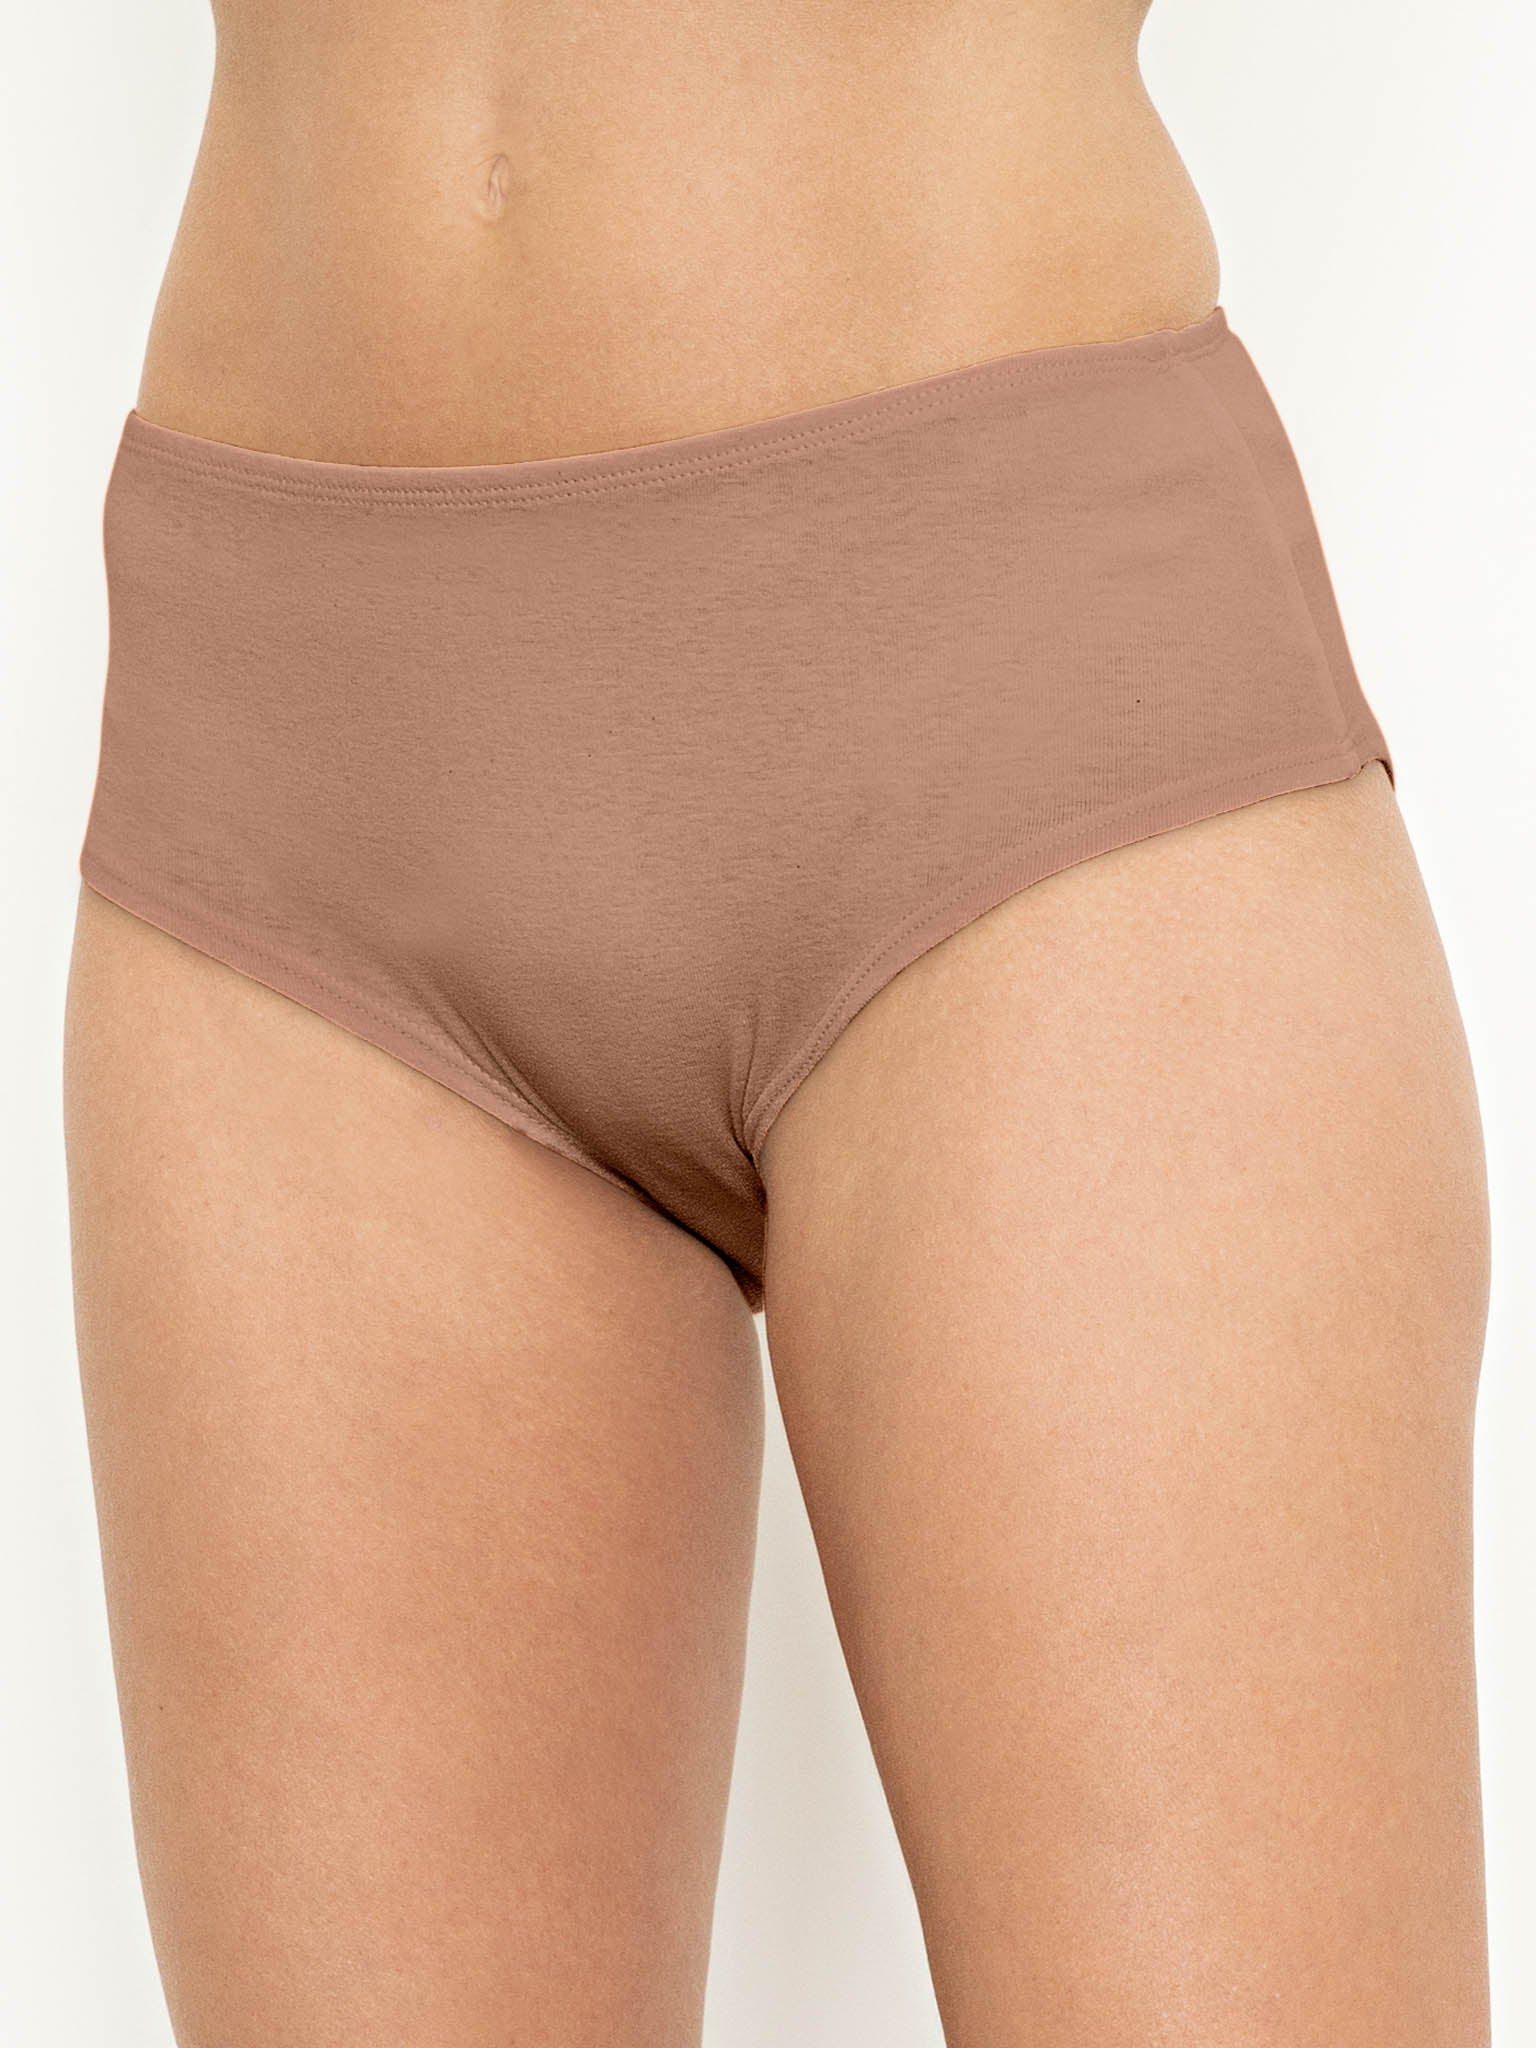 Women's Intimate Underwear Tagged Blue Canoe - Natural Clothing